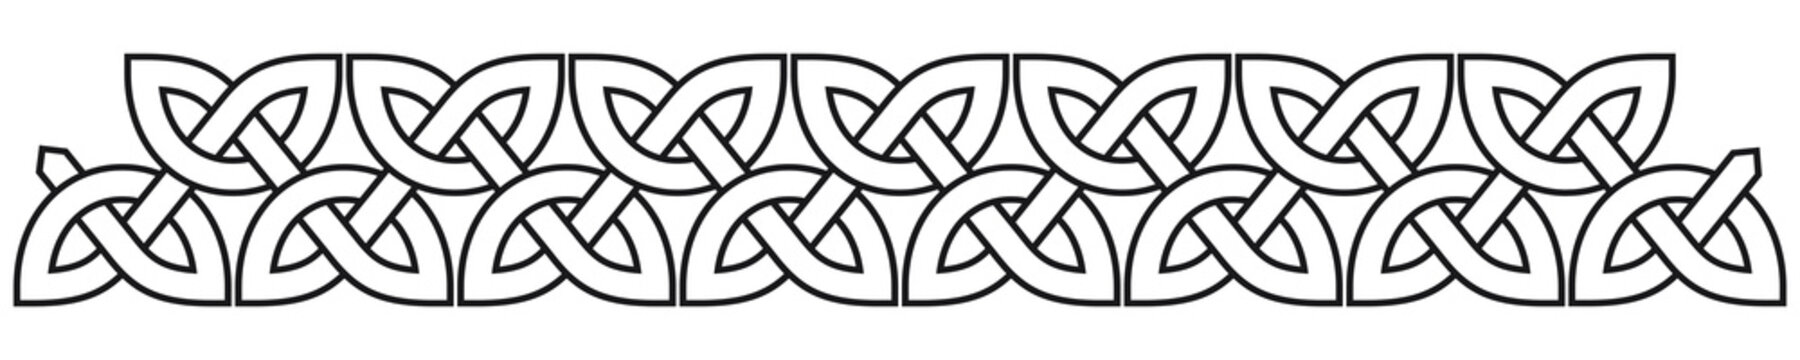 Celtic knot border clip-art. Linear border made with Celtic knots for use in designs for St. Patrick's Day.